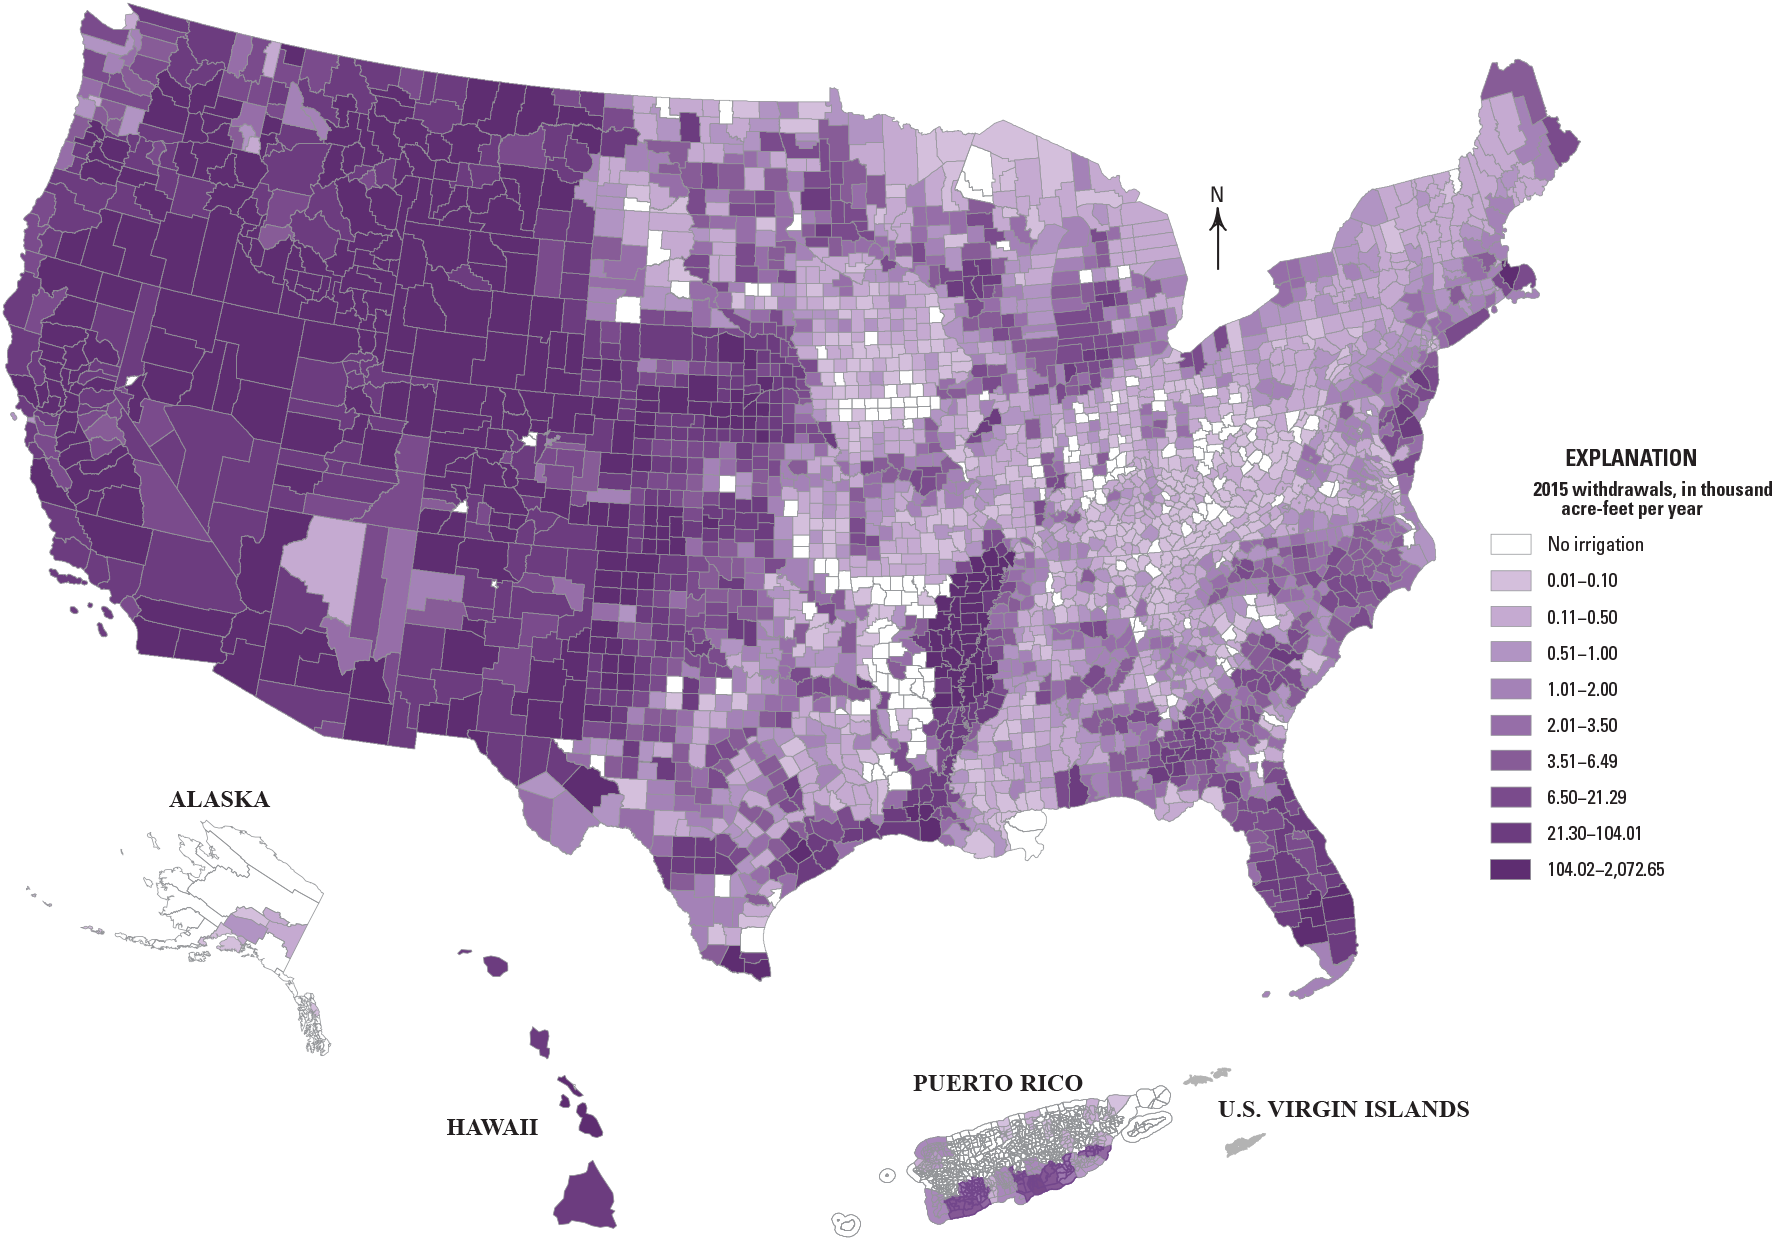 Color-shading that represents withdrawals by county or municipality.